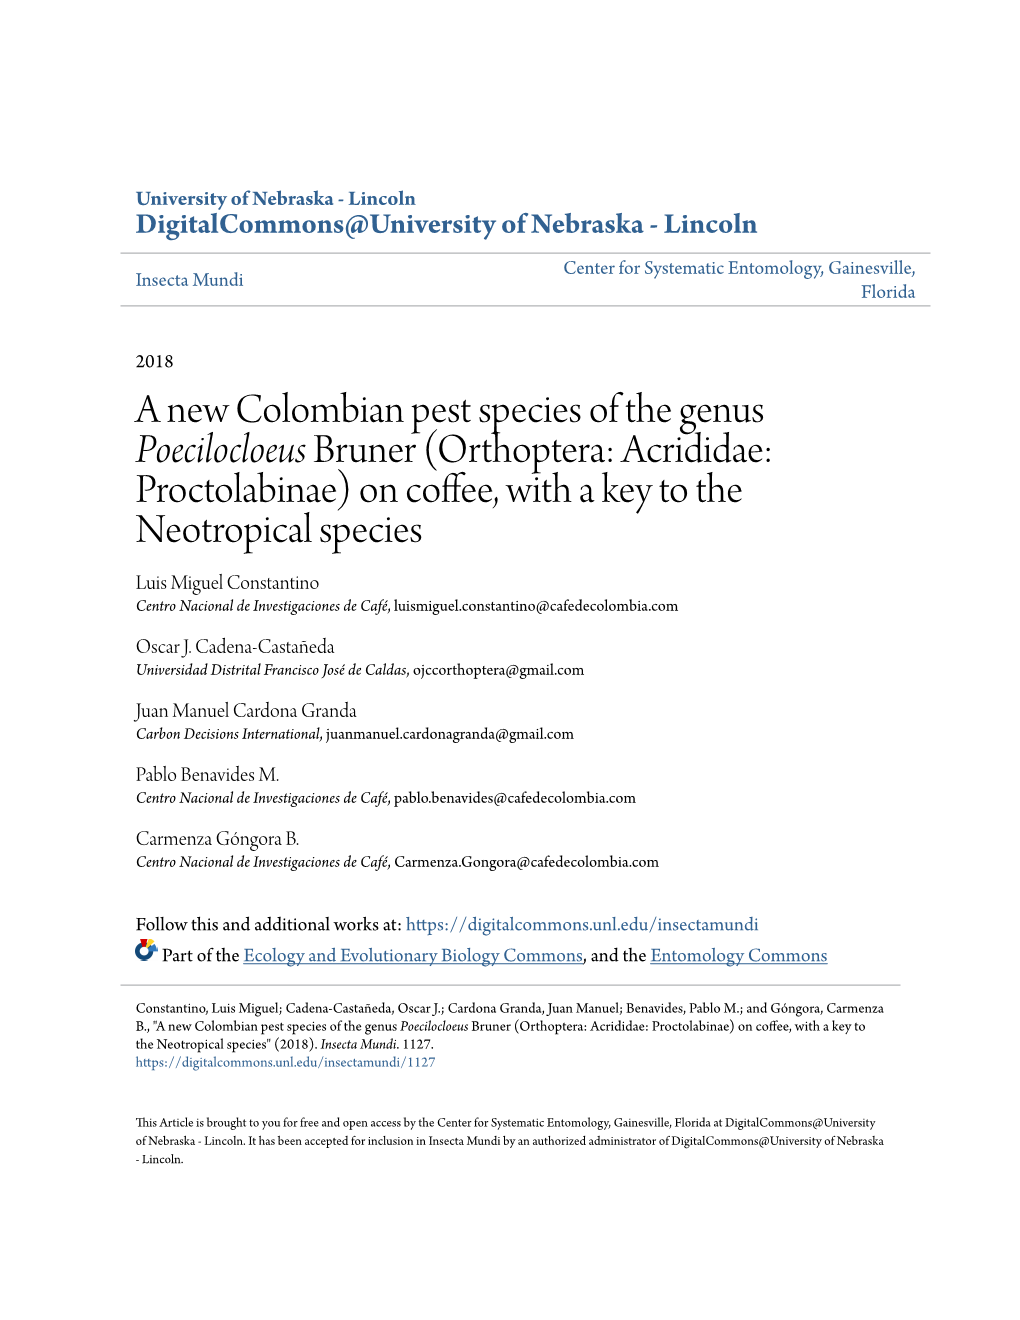 A New Colombian Pest Species of the Genus